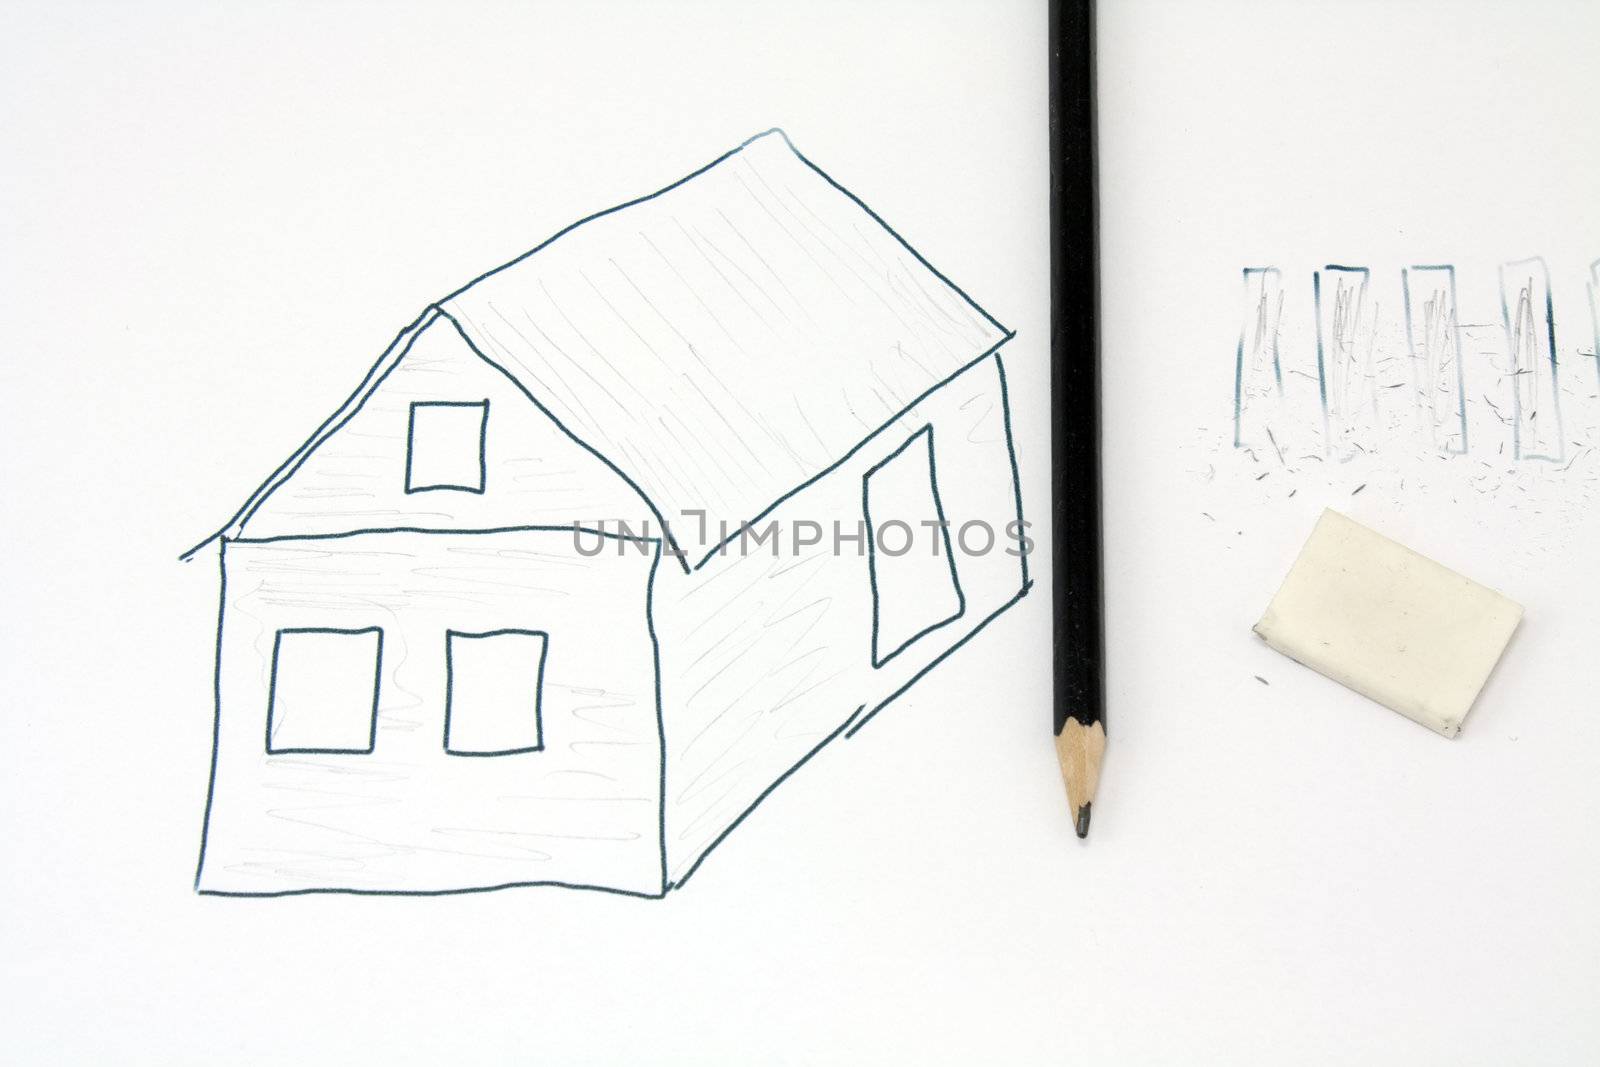 Drawing pencil. Unfinished Sketch farmhouse